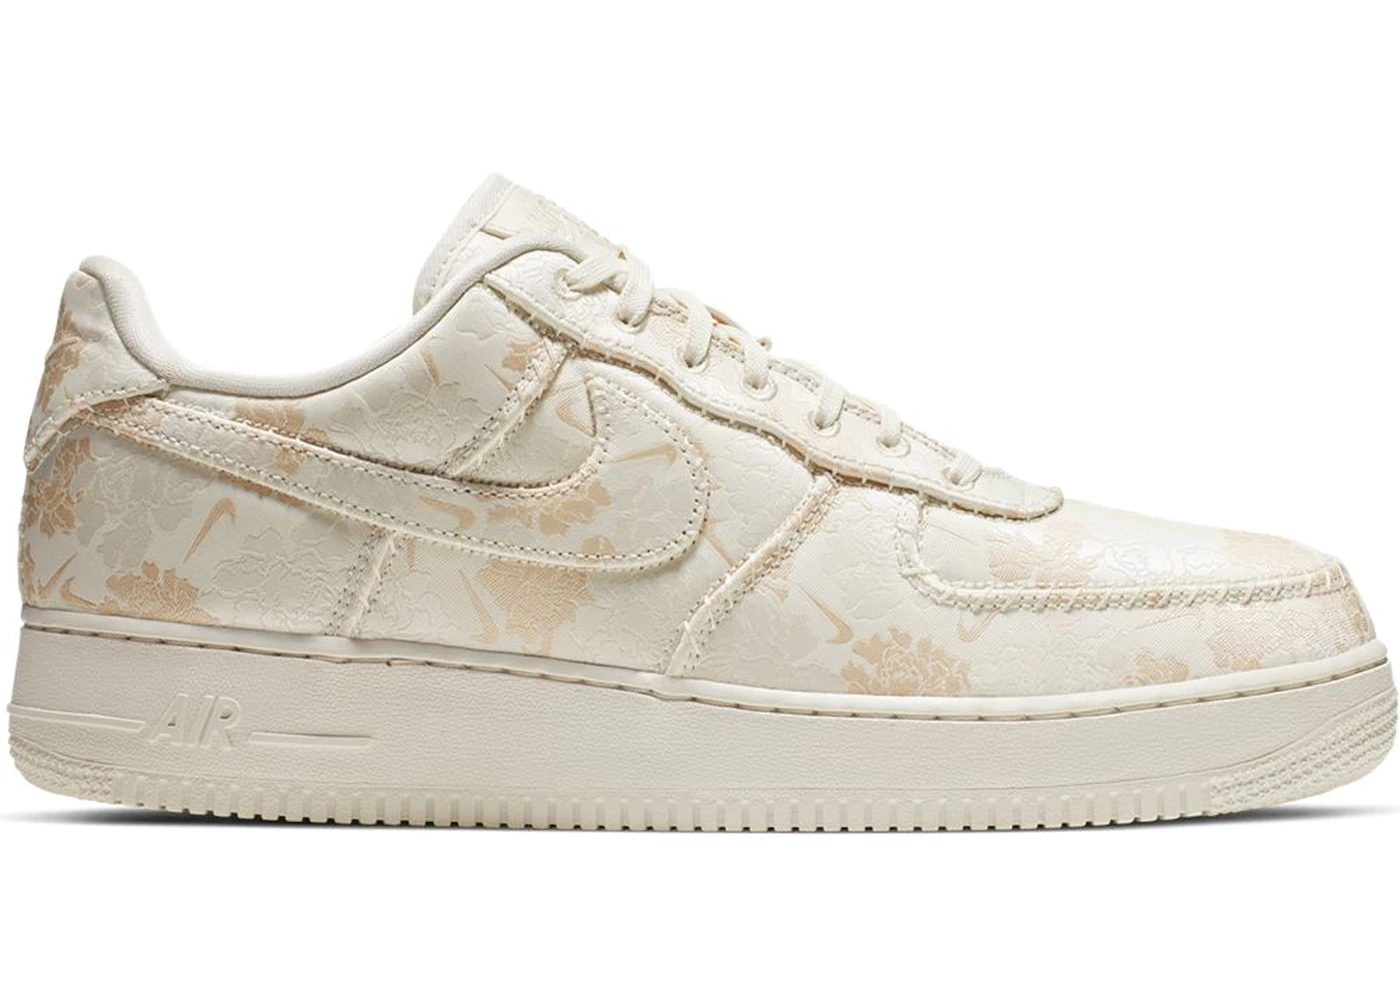 Nike Air Force 1 Low Satin Floral Pale Ivory